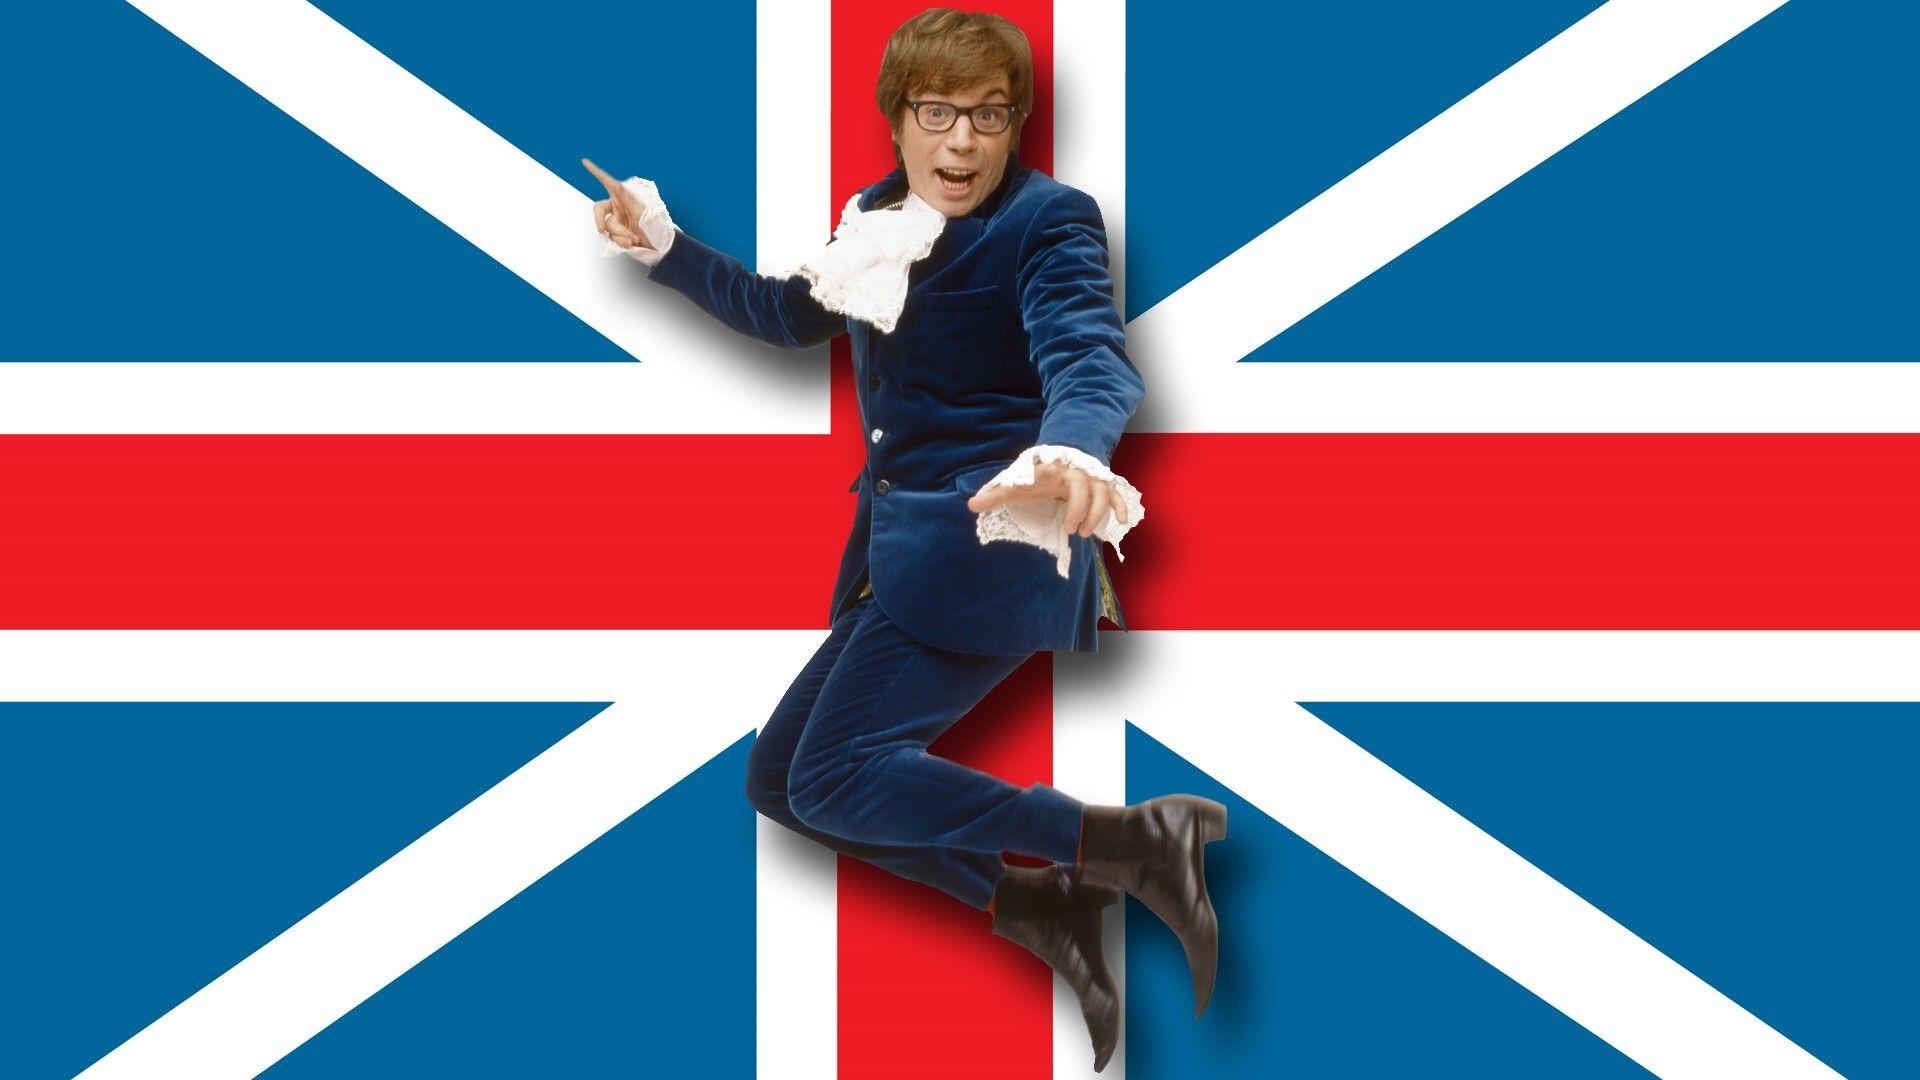 Austin Powers: The Spy Who Shagged Me HD Wallpaper. Background